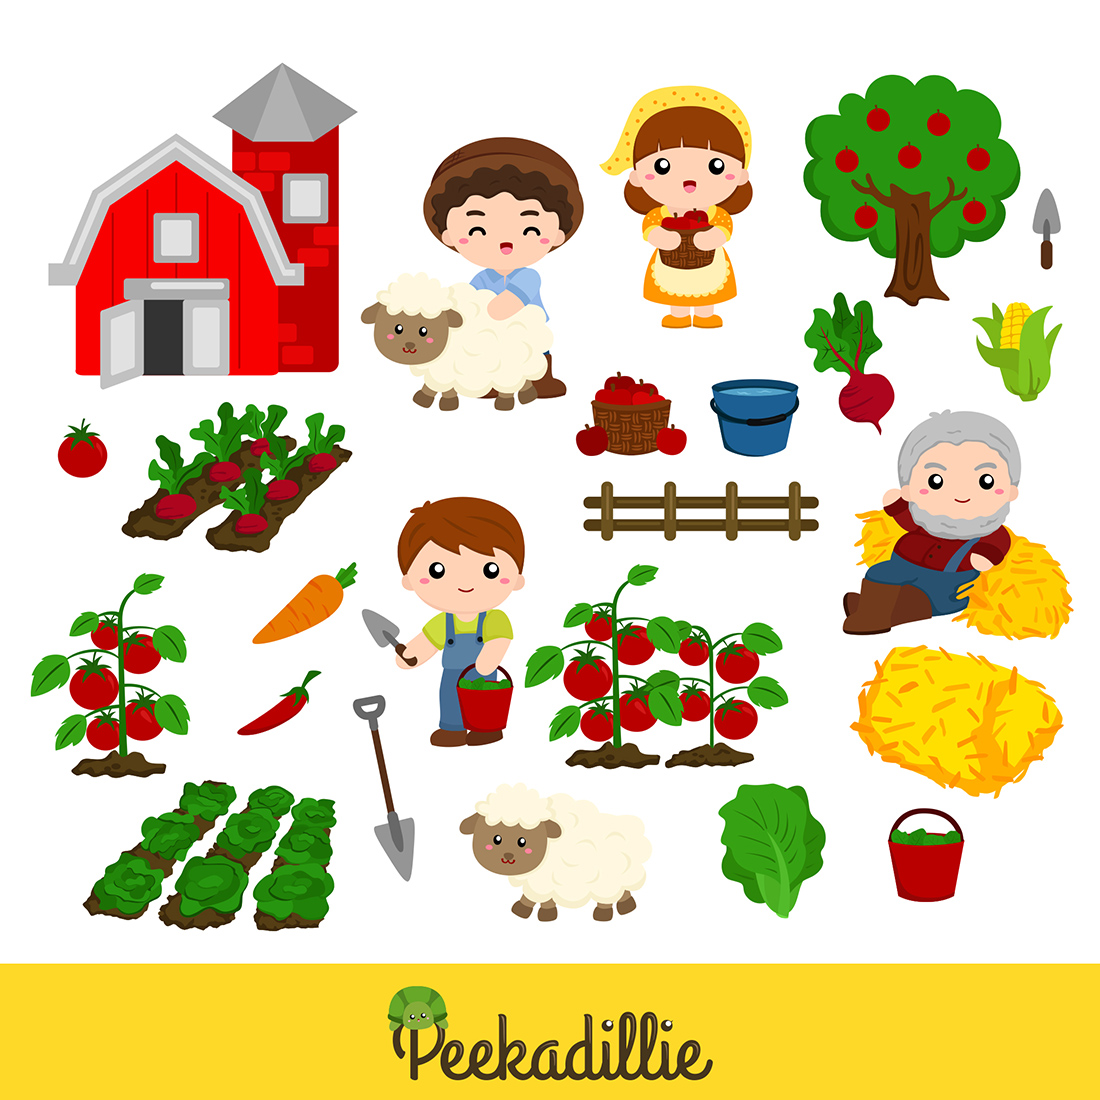 Kids and Farmer Family Farm Life Illustration Vector Clipart Cartoon preview image.